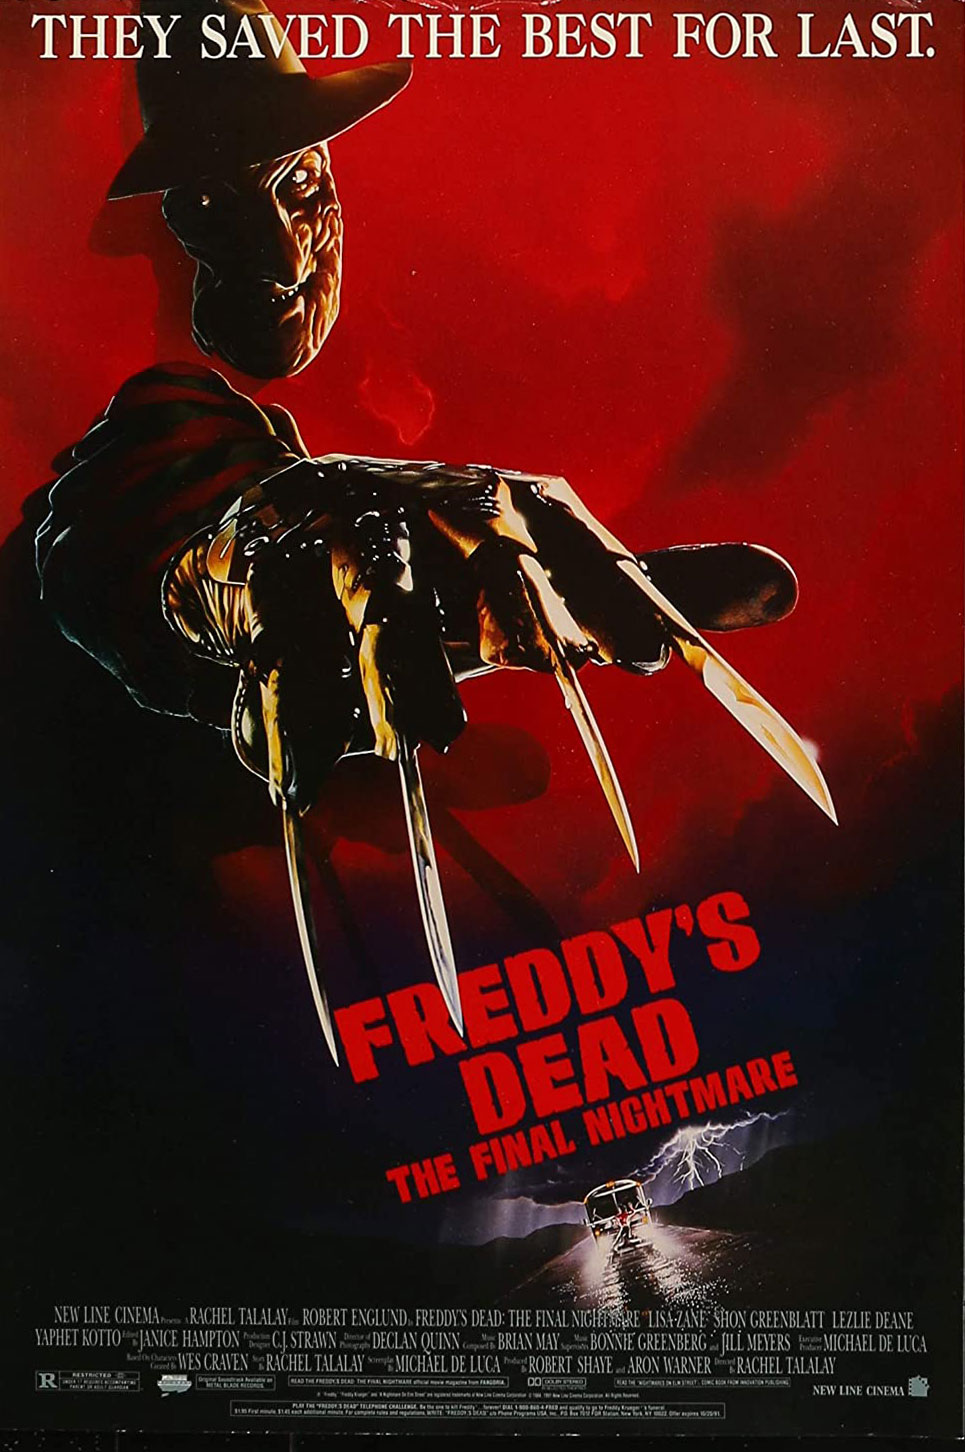 Freddy's Dead: The Final Nightmare movie poster